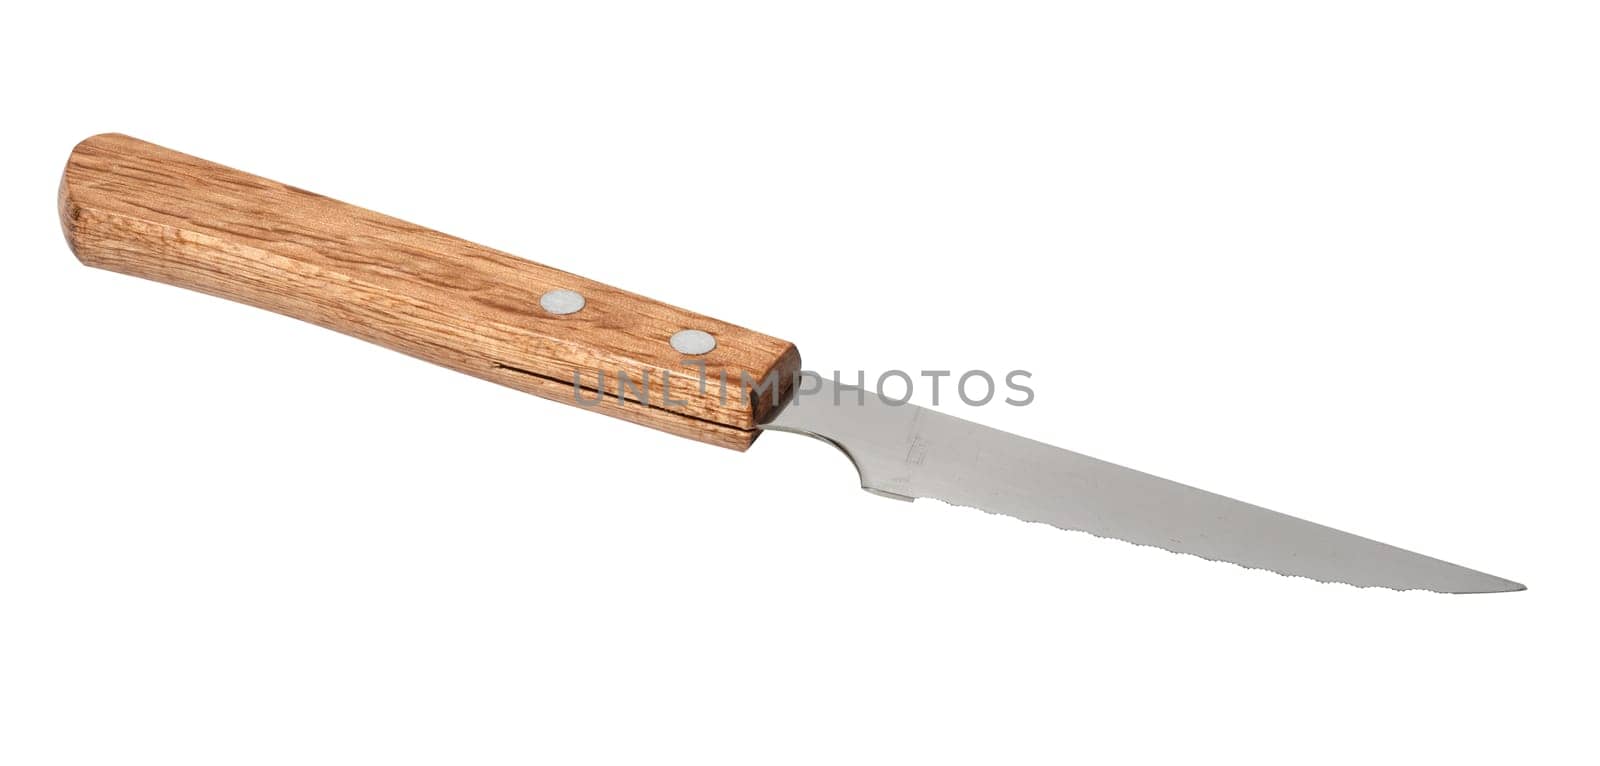 Table knife with a wooden handle on a white isolated background by ndanko